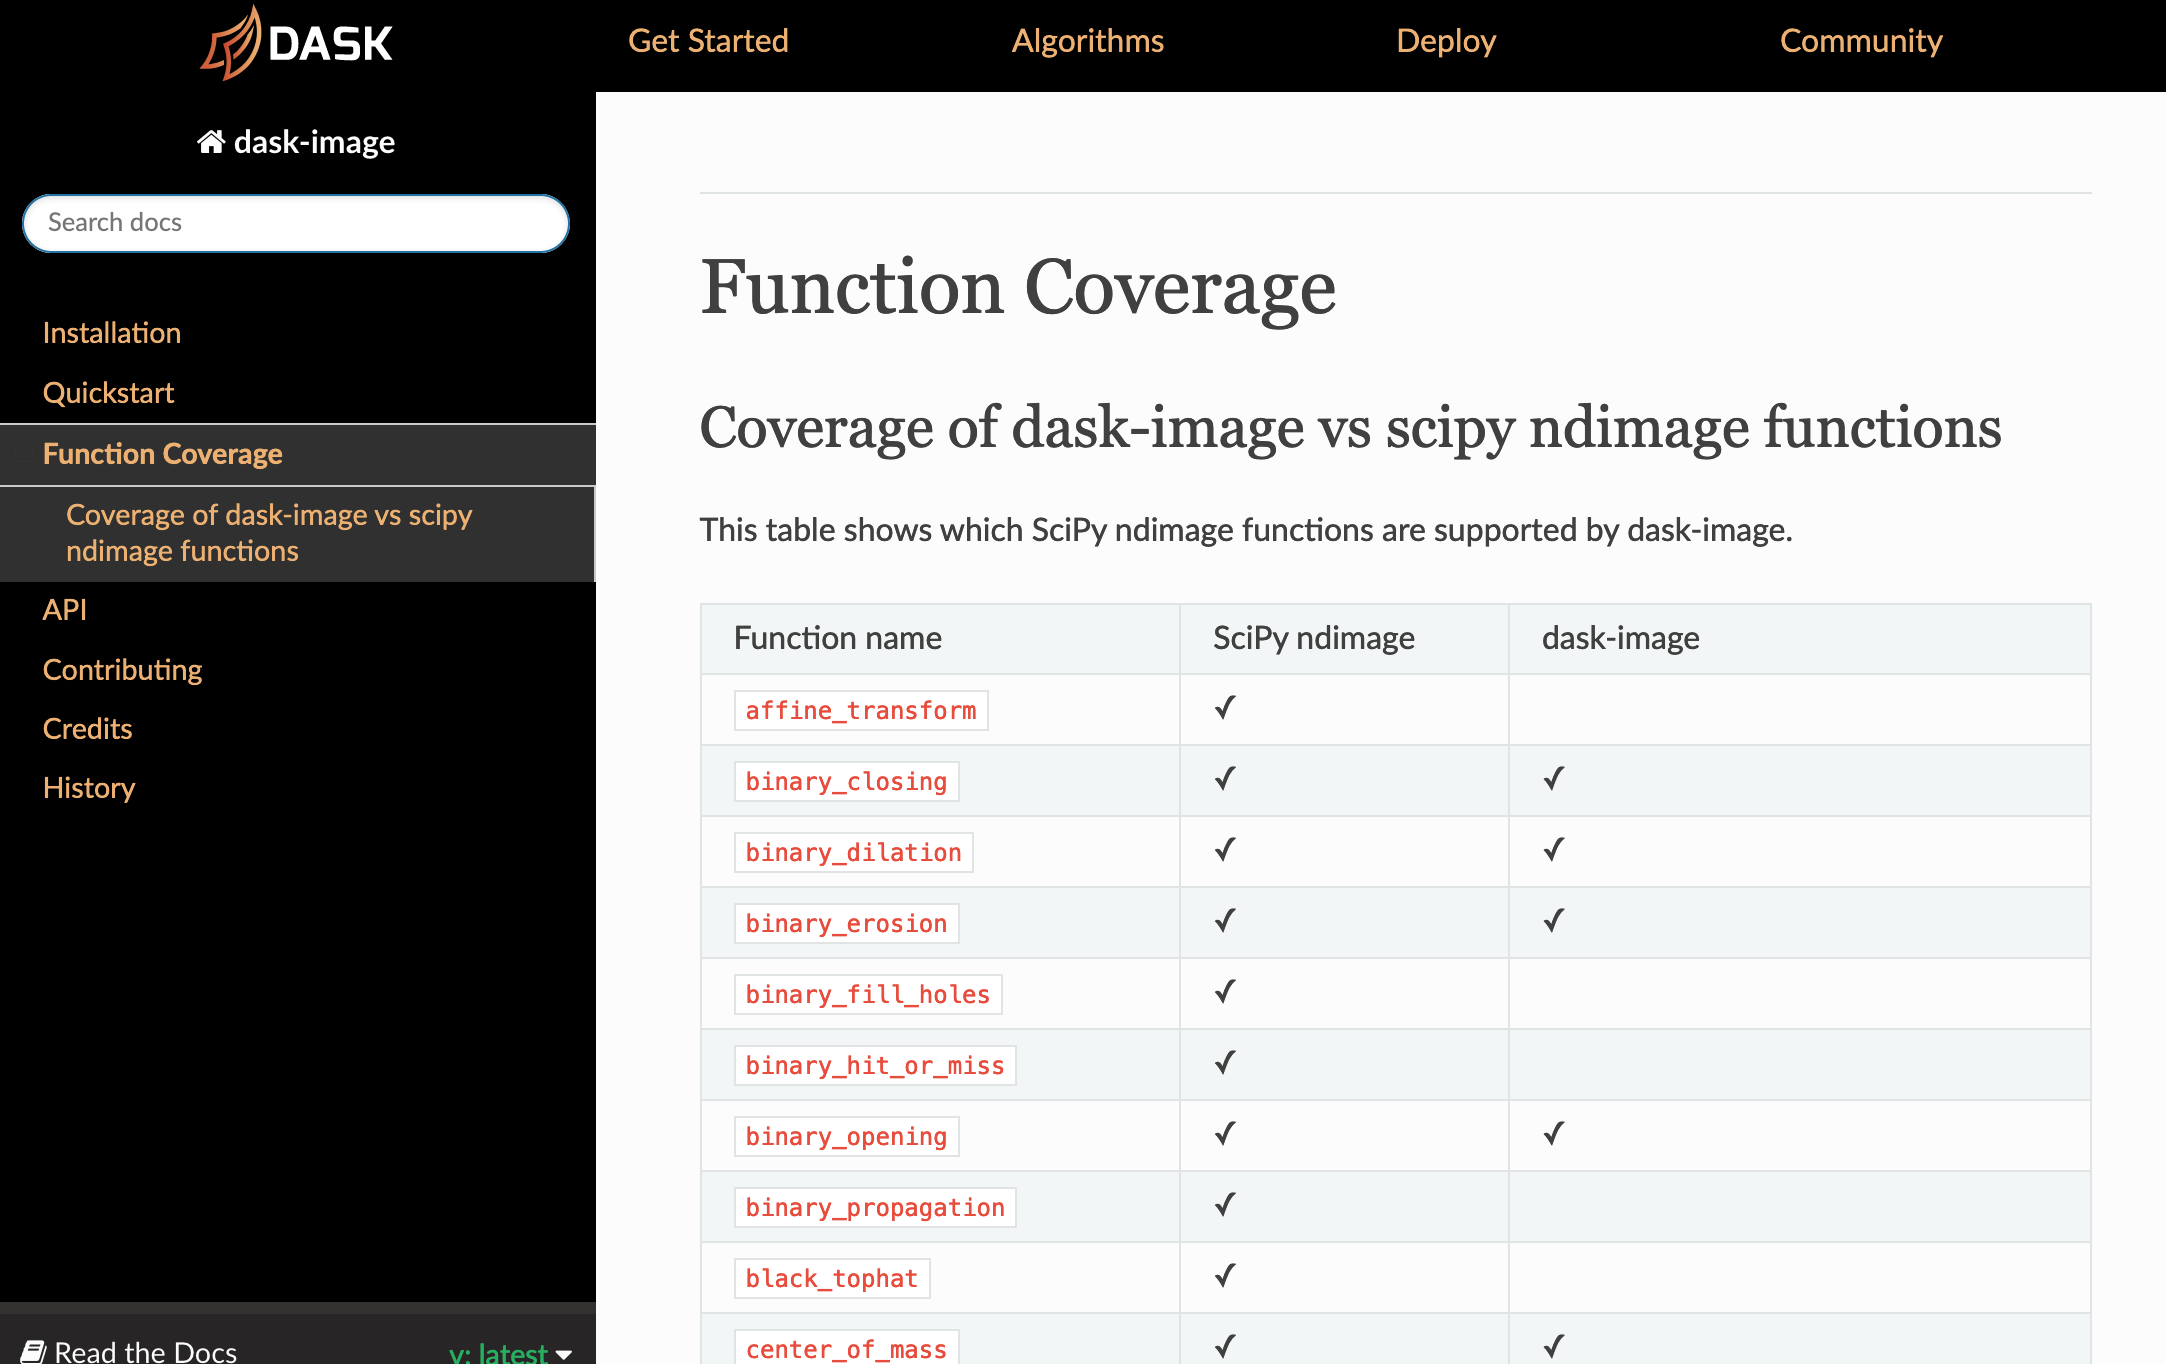 Table of function coverage: scipy.ndimage compared to dask-image http://image.dask.org/en/latest/coverage.html